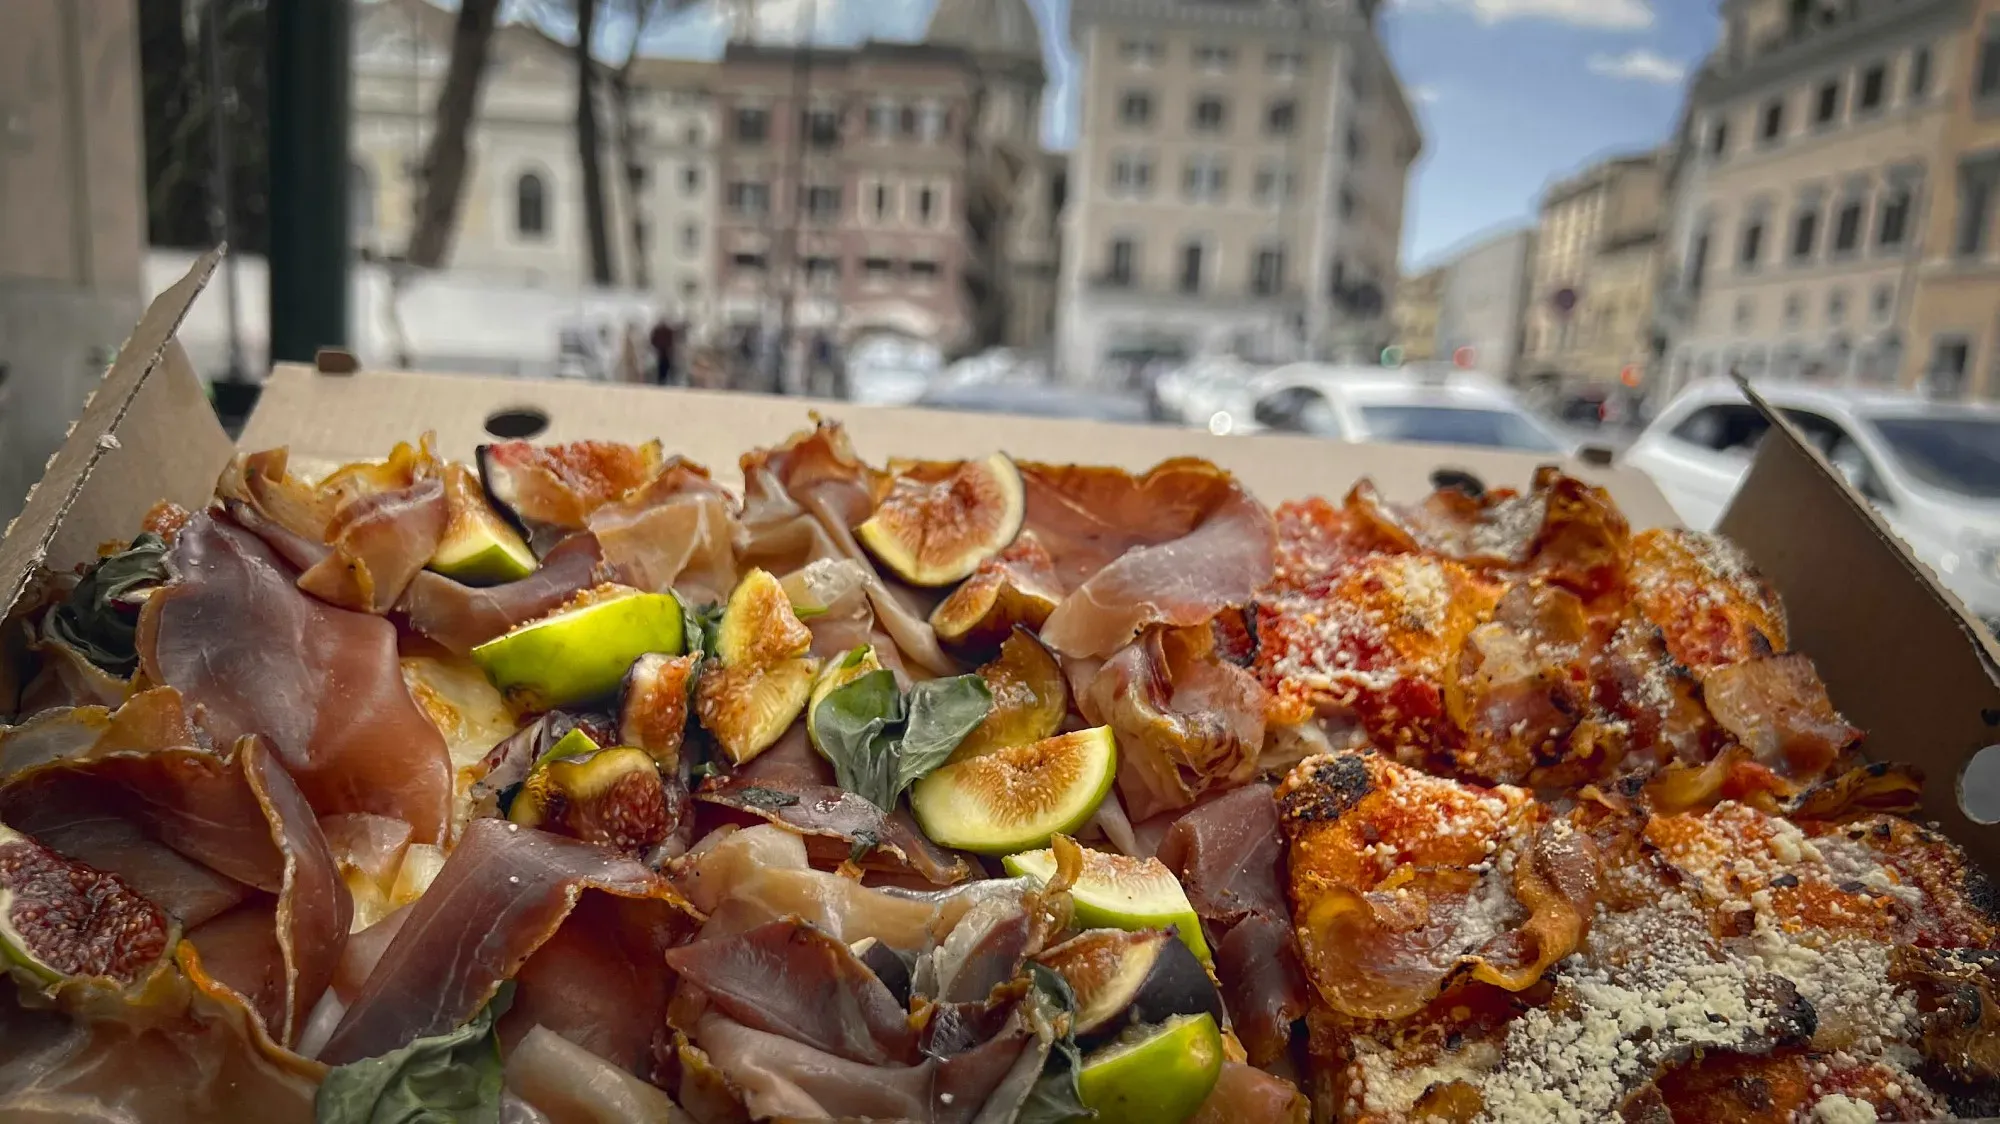 Roman-style pizza. Angled shot with Roman architecture in the background.